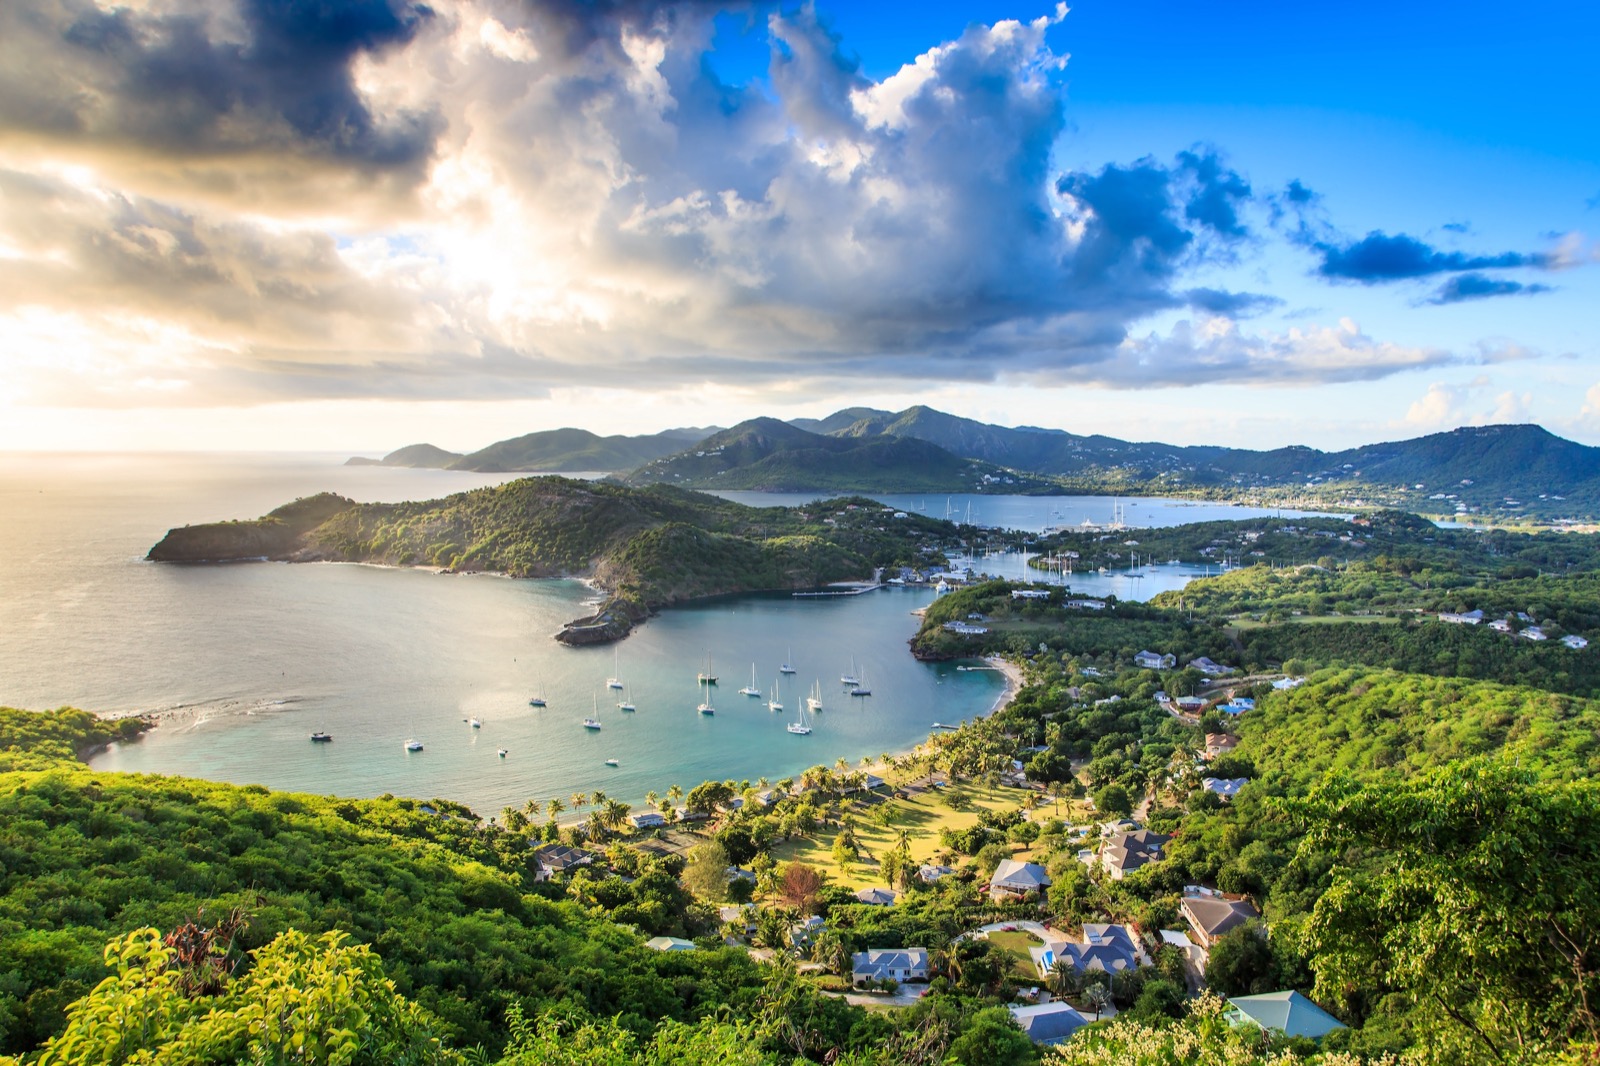 Here Are 24 Glorious Natural Attractions – Can You Match Them to Their Country? Antigua and Barbuda